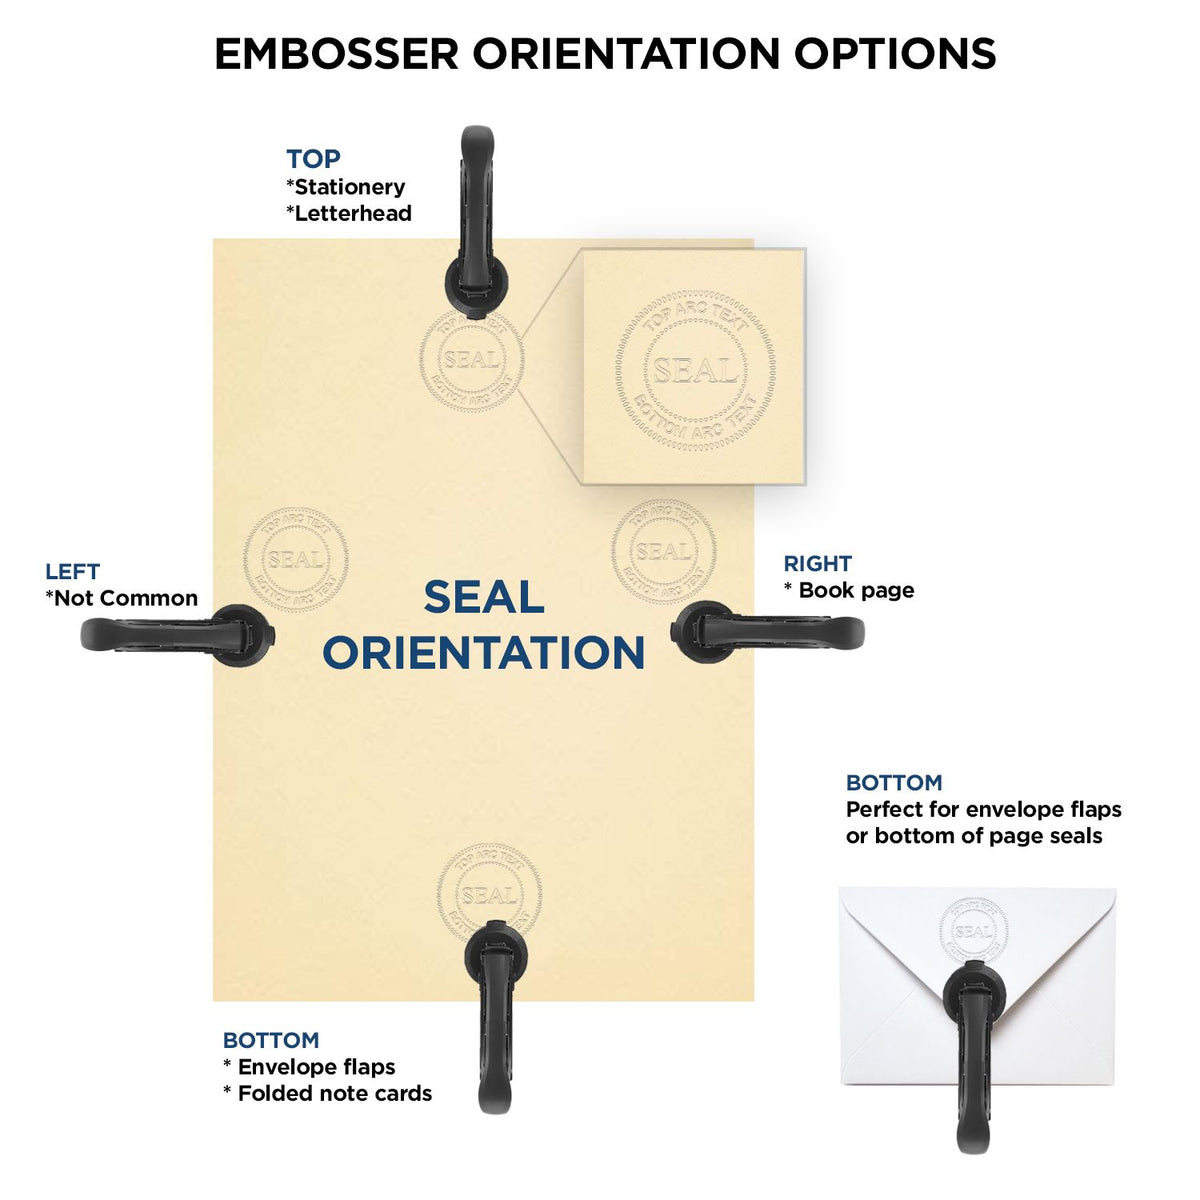 An infographic for the Long Reach Massachusetts Land Surveyor Seal showing embosser orientation, this is showing examples of a top, bottom, right and left insert.